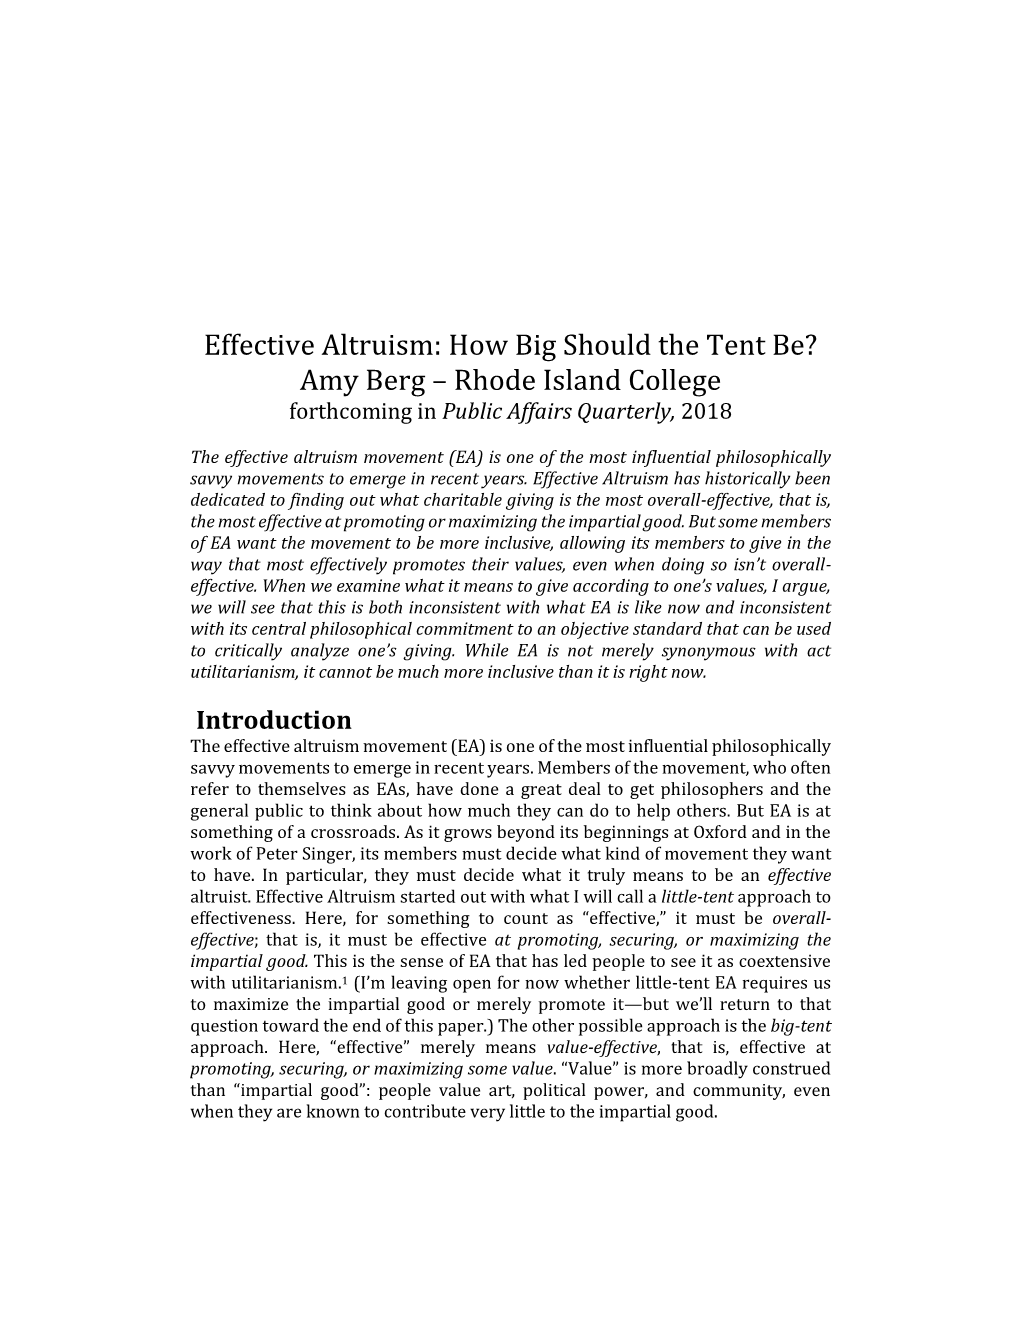 Effective Altruism: How Big Should the Tent Be? Amy Berg – Rhode Island College Forthcoming in Public Affairs Quarterly, 2018